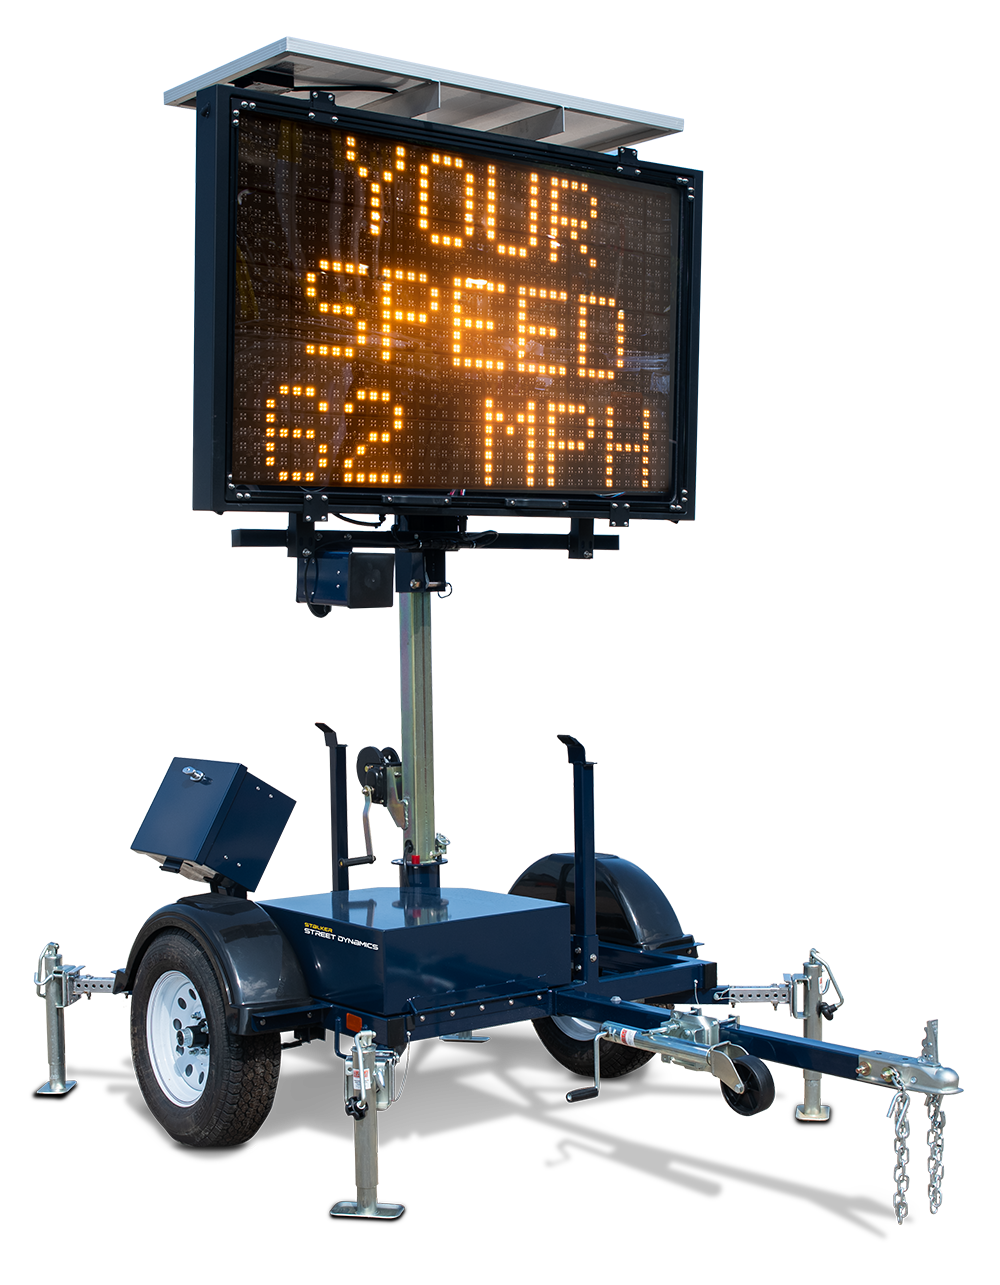 MC360 messaging sign to calm traffic in your neighborhood and on your highways